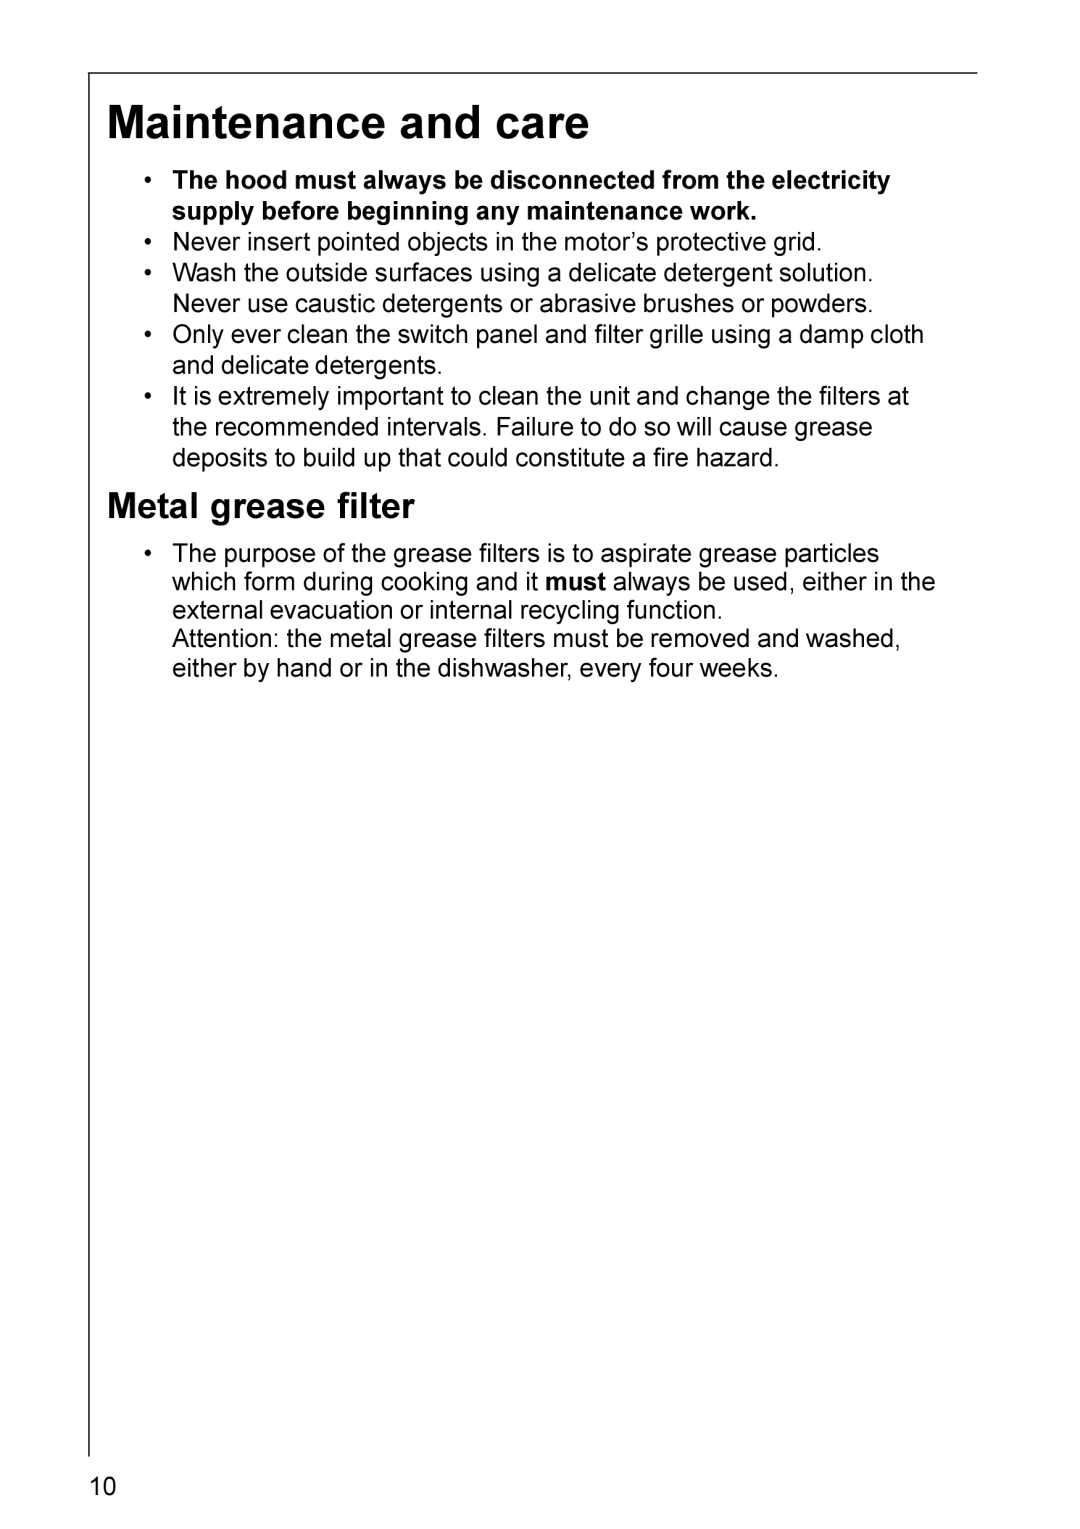 Electrolux HD 8694 installation instructions Maintenance and care, Metal grease filter 